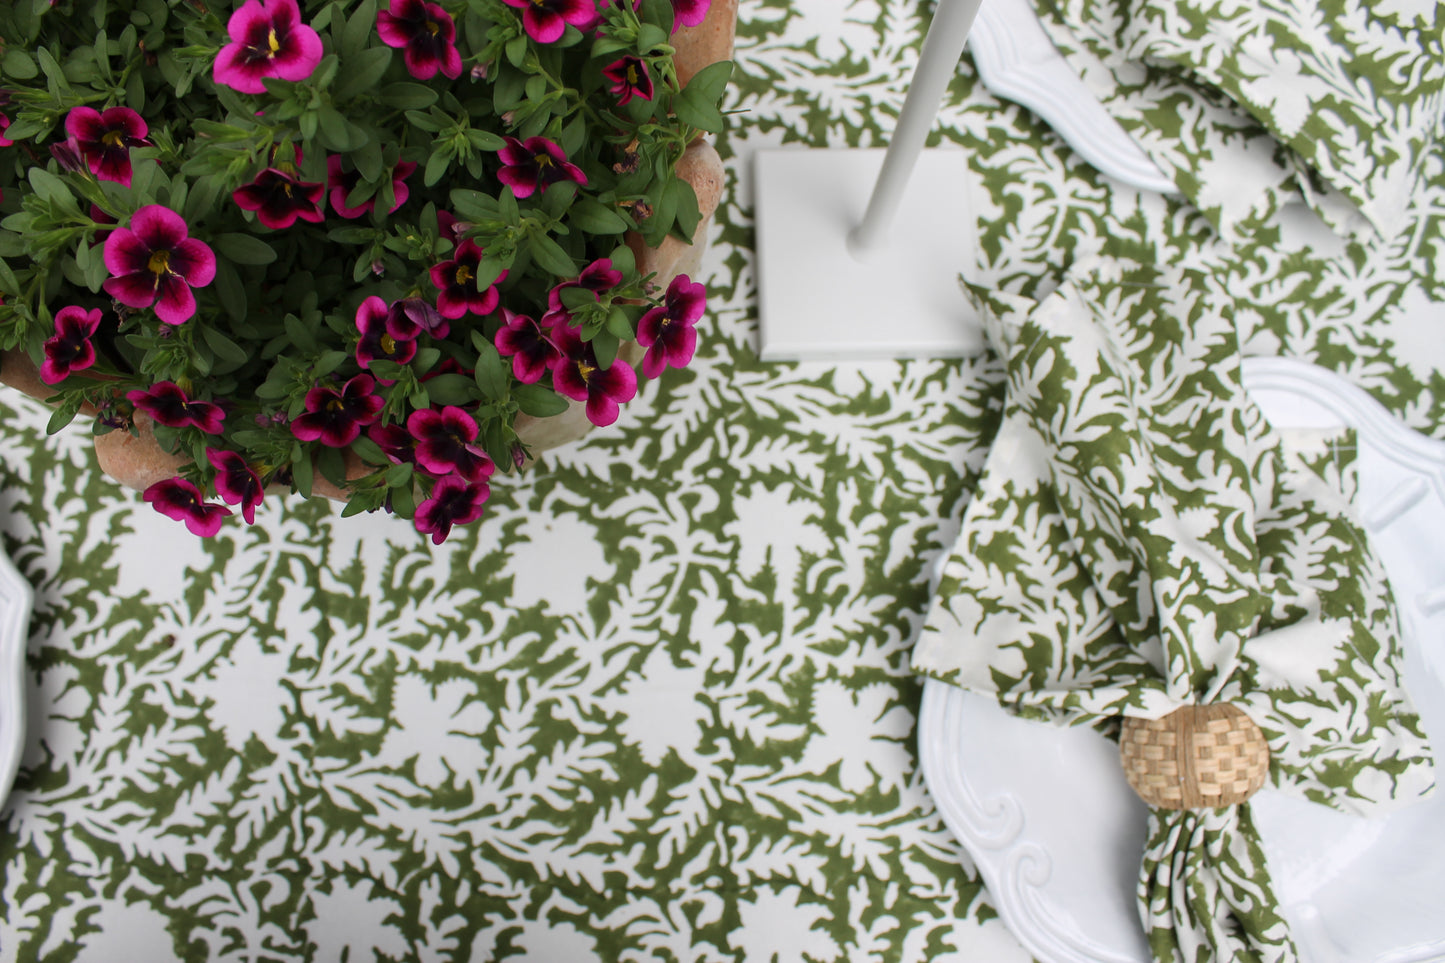 Pressed Florals Tablecloth in Olive